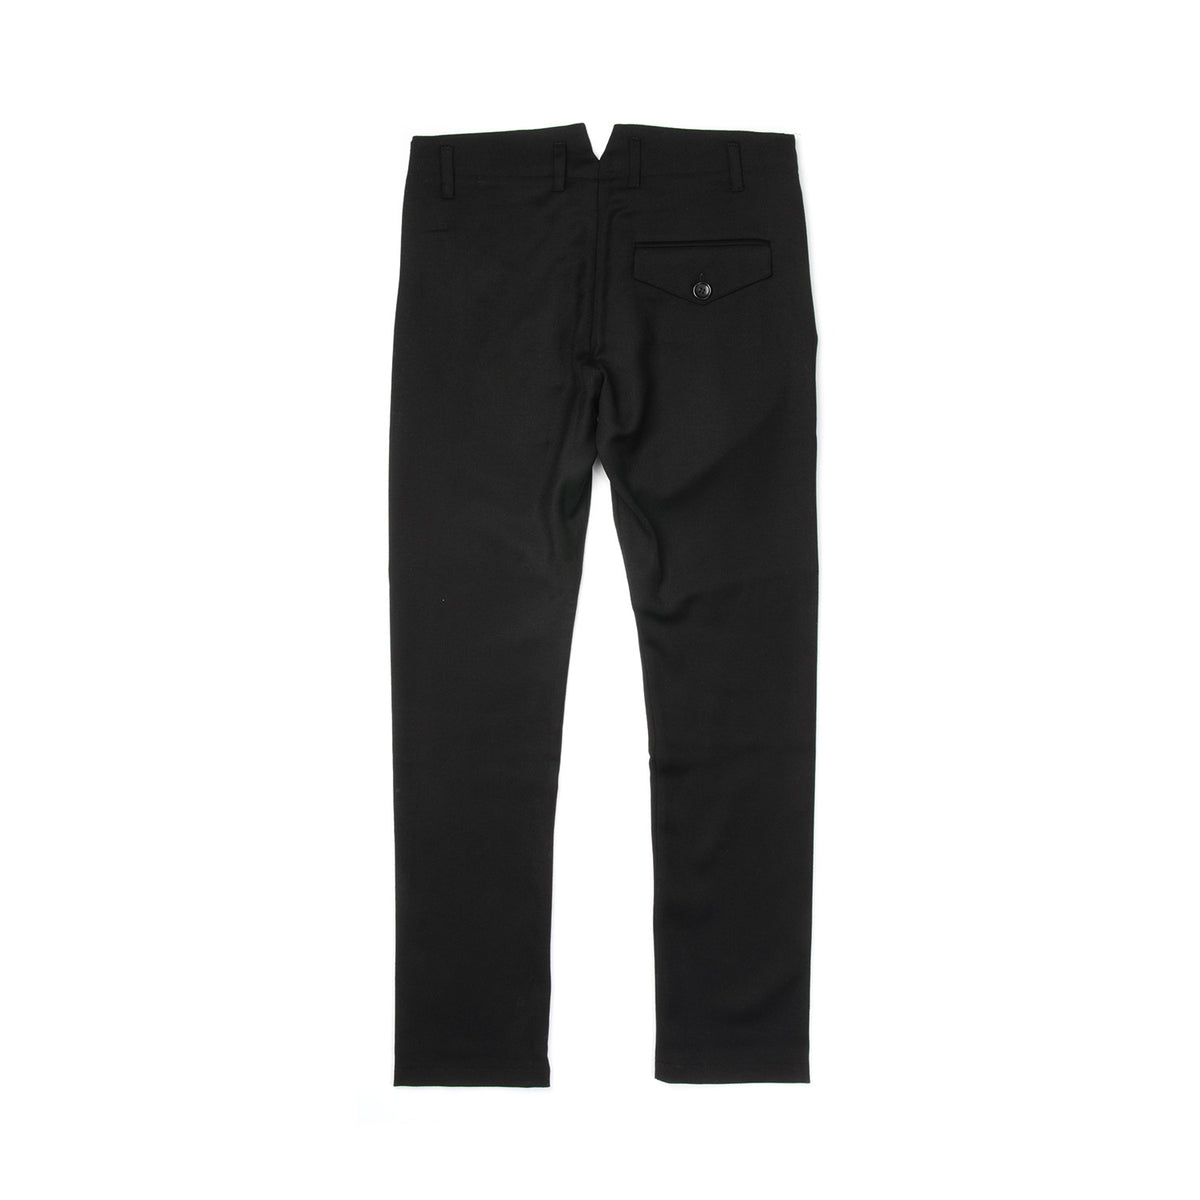 Hansen | W 'Aase' Slim Fitted Trousers Black - Concrete